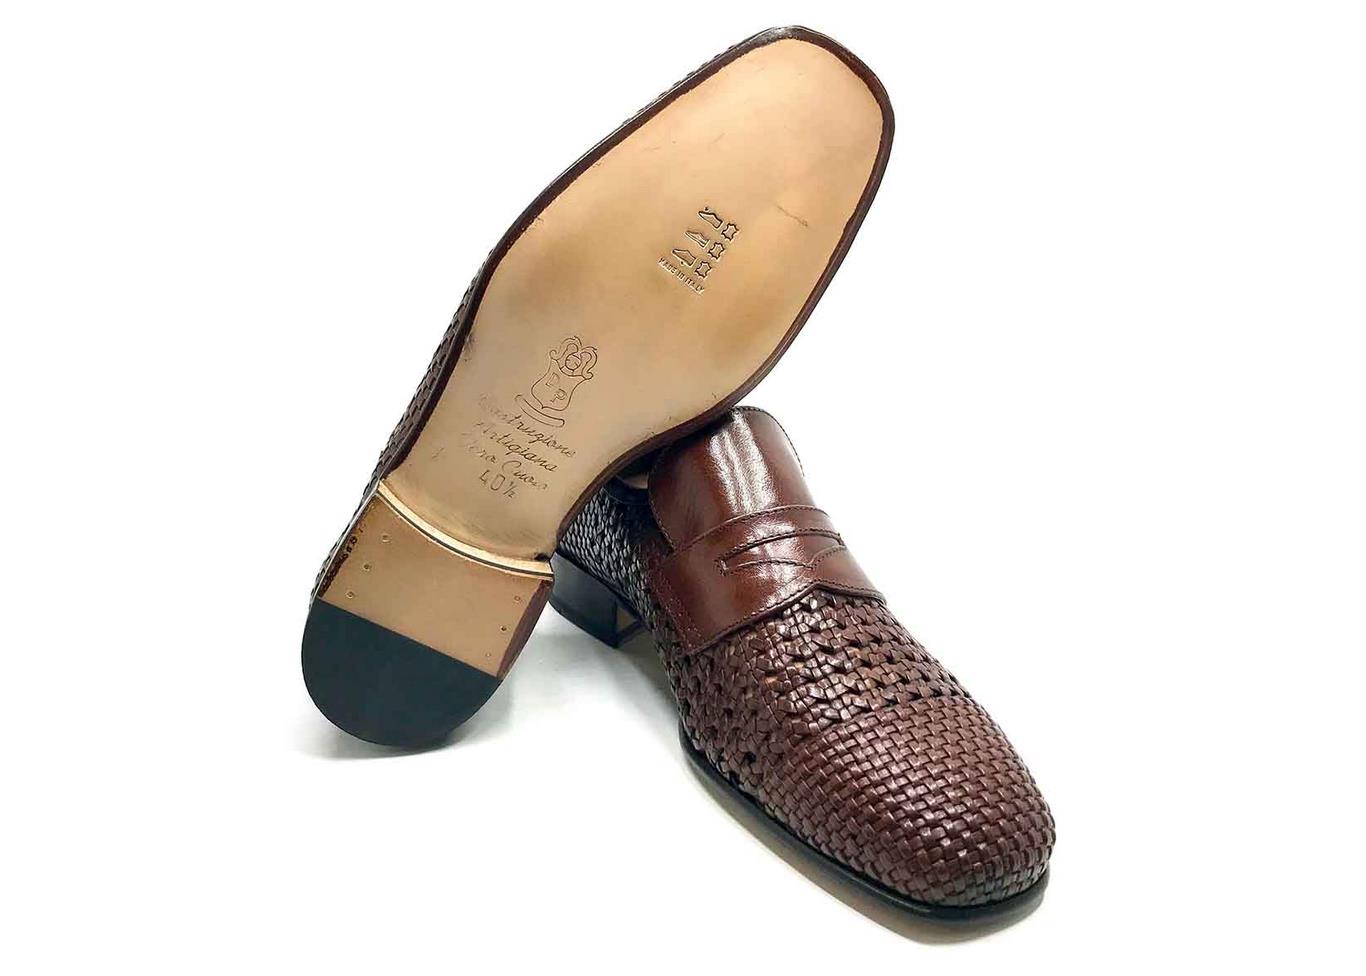 Comfort Loafer in Brown woven leather